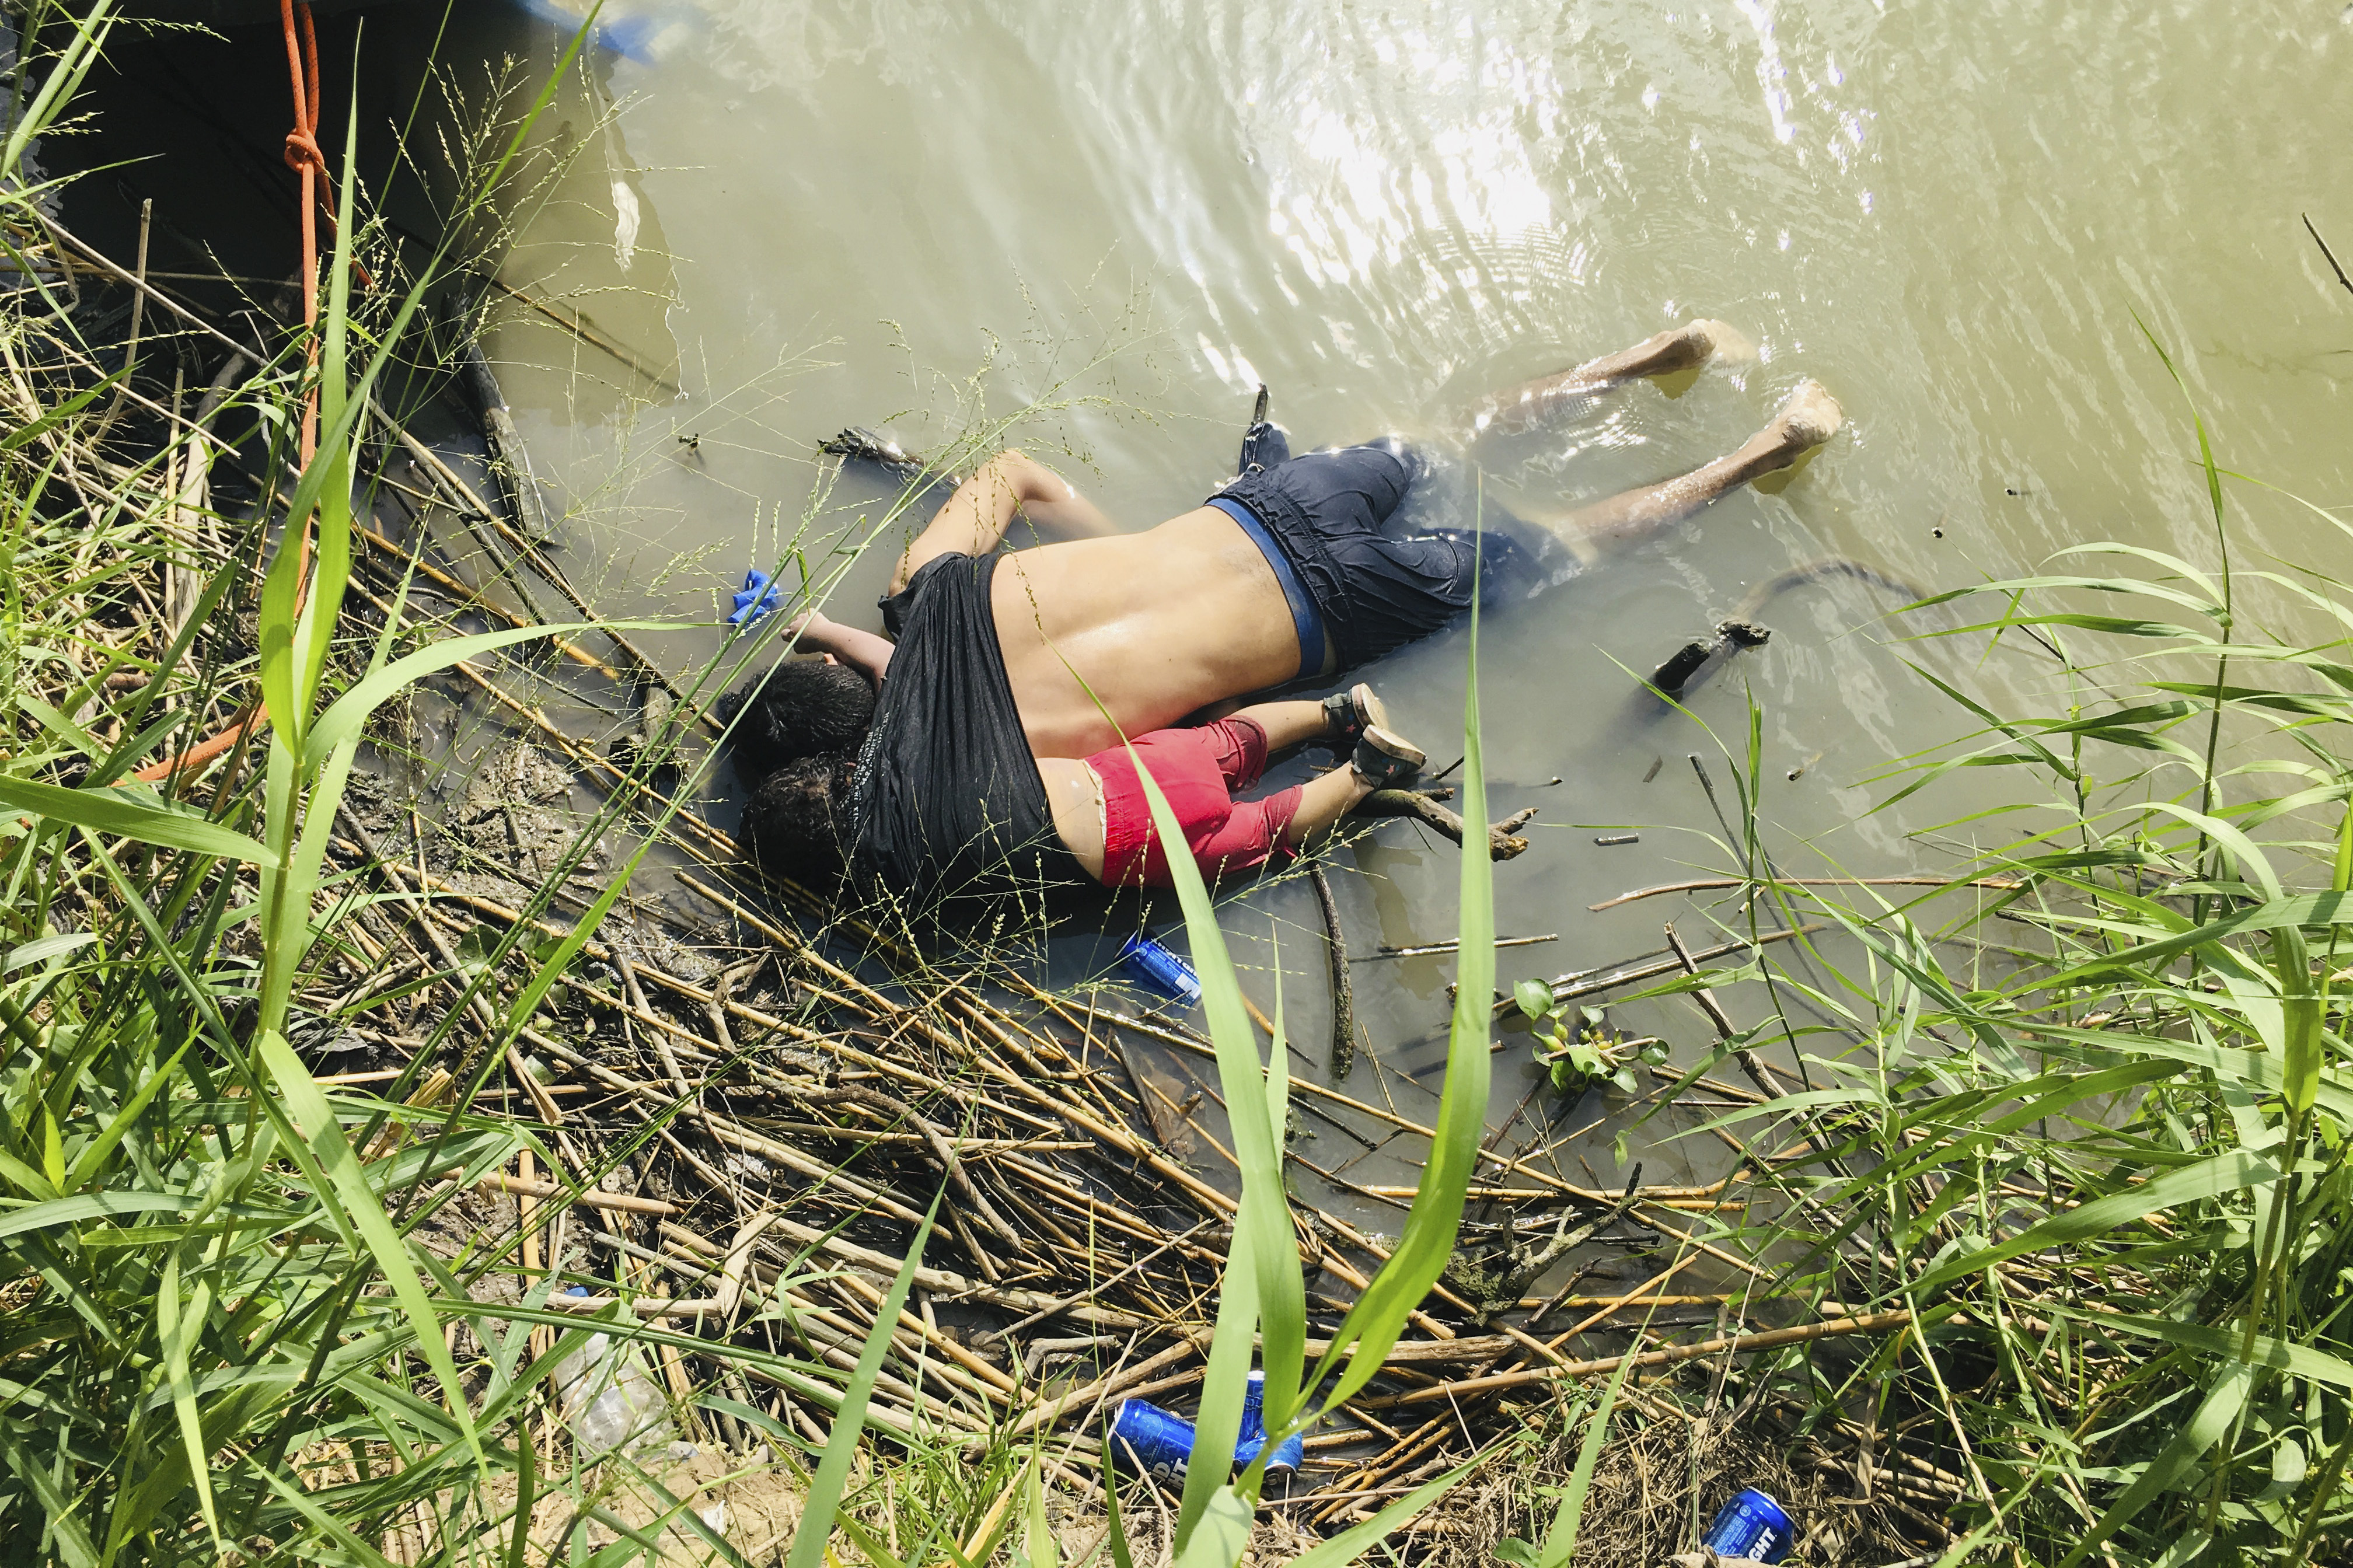 The bodies of Salvadoran migrant Oscar Alberto Martínez Ramírez and his nearly 2-year-old daughter, Valeria, lie on the bank of the Rio Grande in Matamoros, Mexico, after they drowned trying to cross the river to Brownsville, Texas, June 24, 2019.